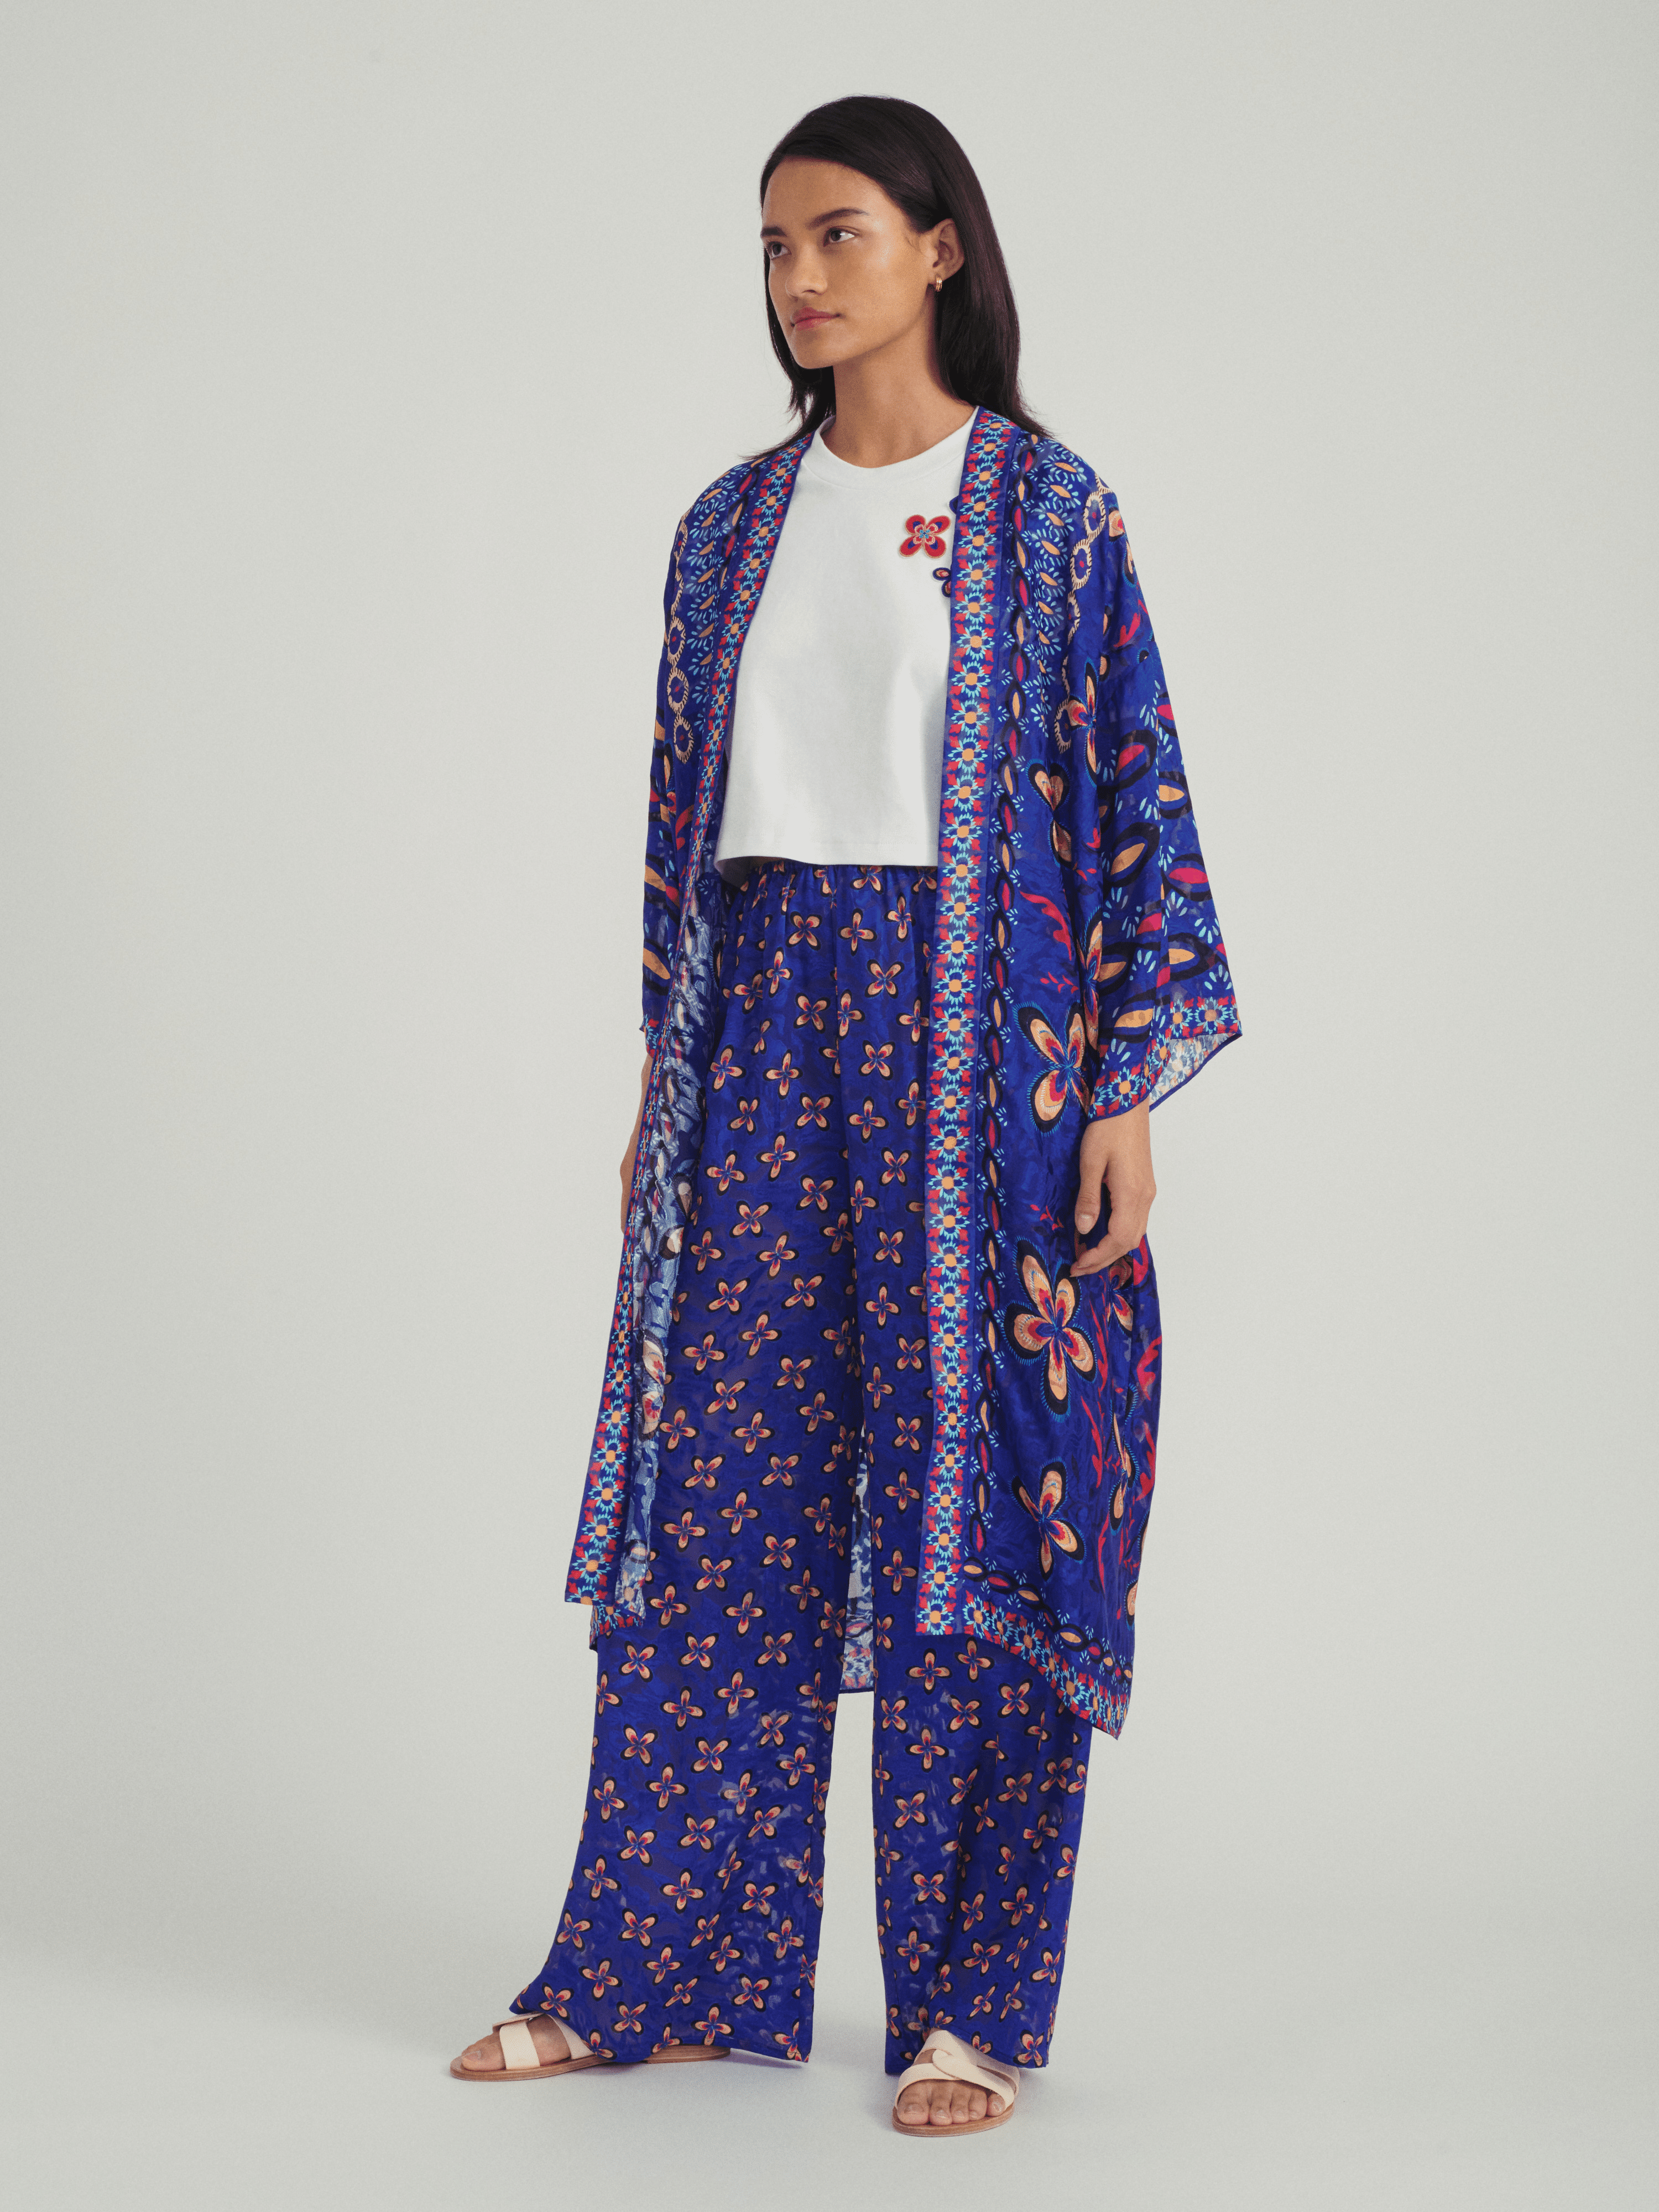 Kai Trousers in Petals Navy